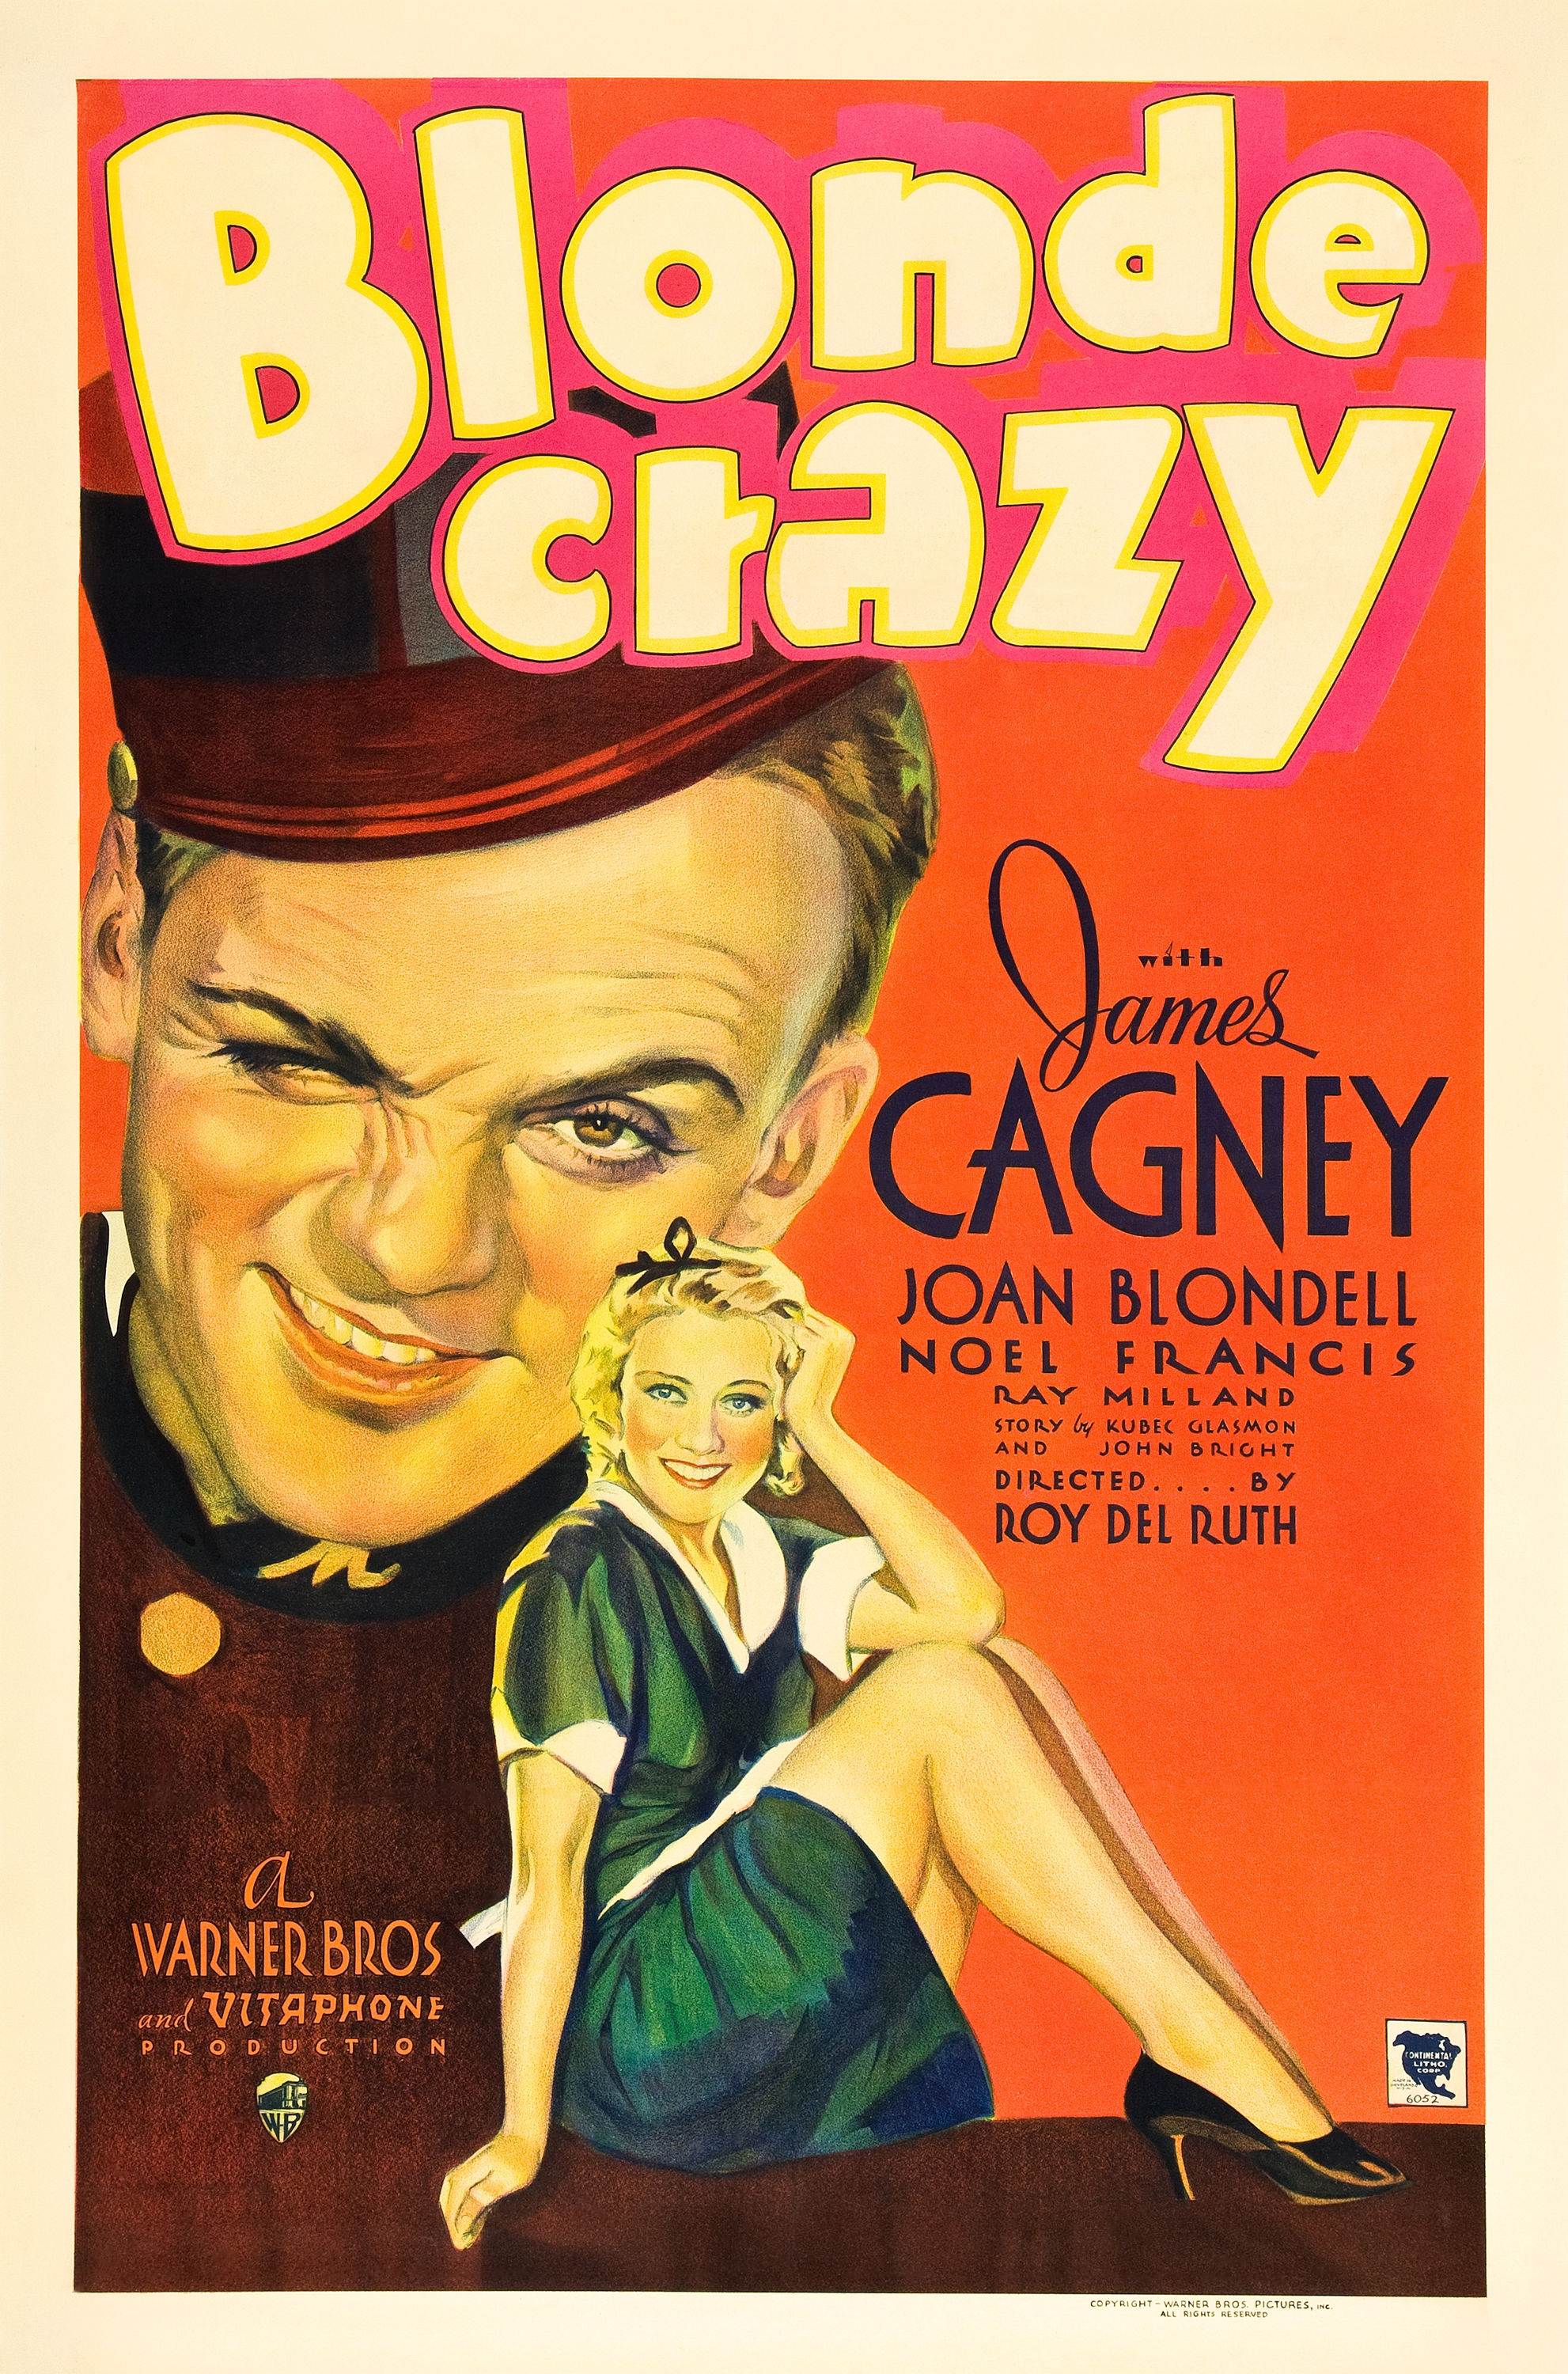 james-cagney-wallpapers